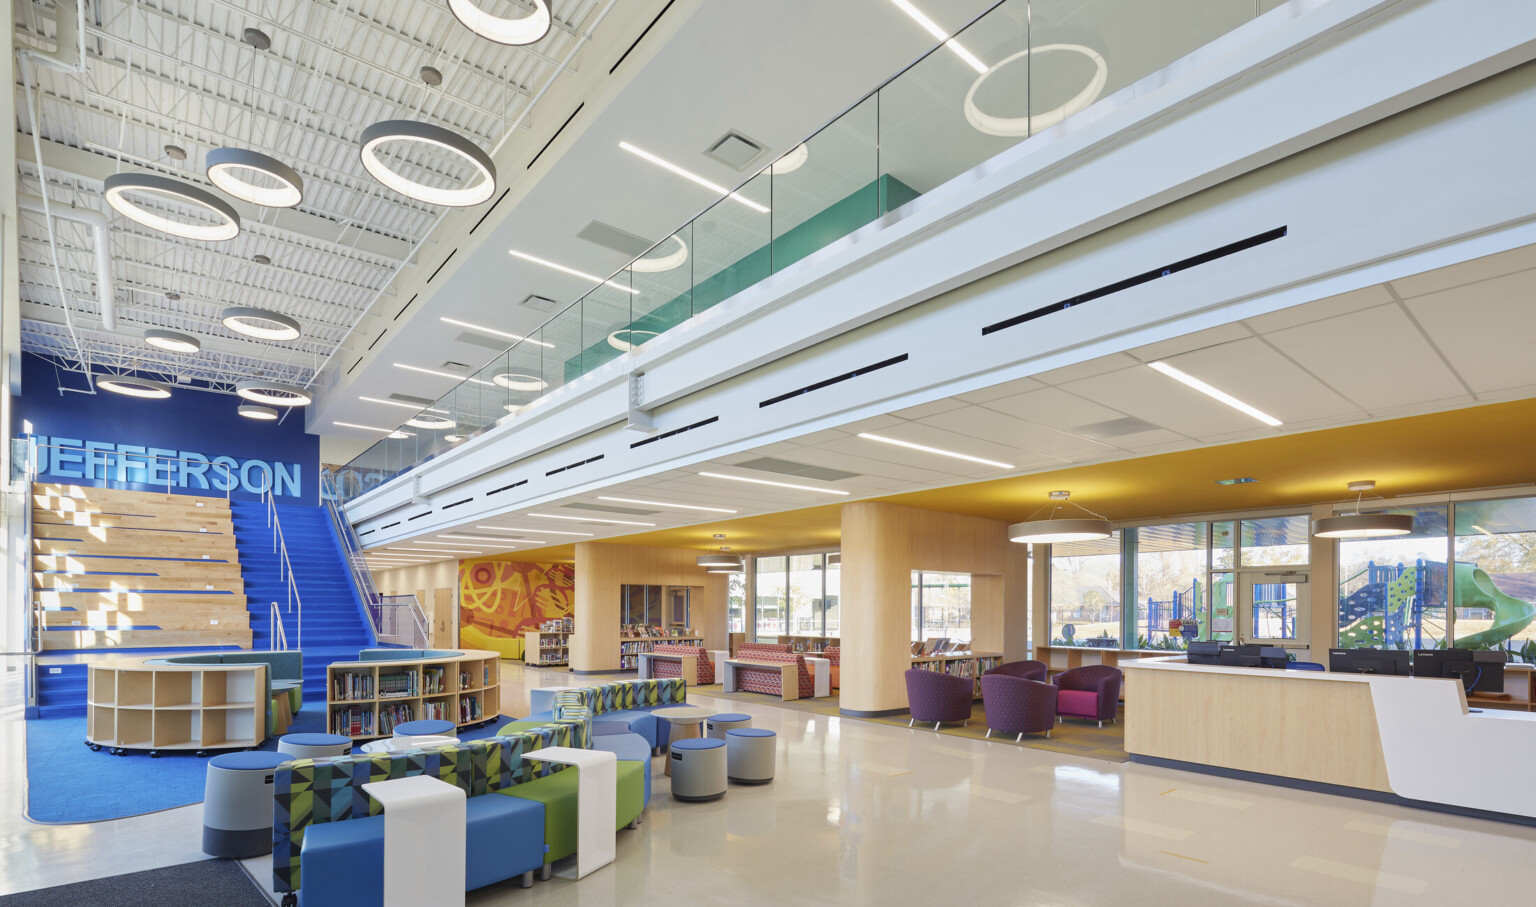 high-ceilings, custom lighting, large open-concept school learning center with multiple seating areas for privacy and collaboration